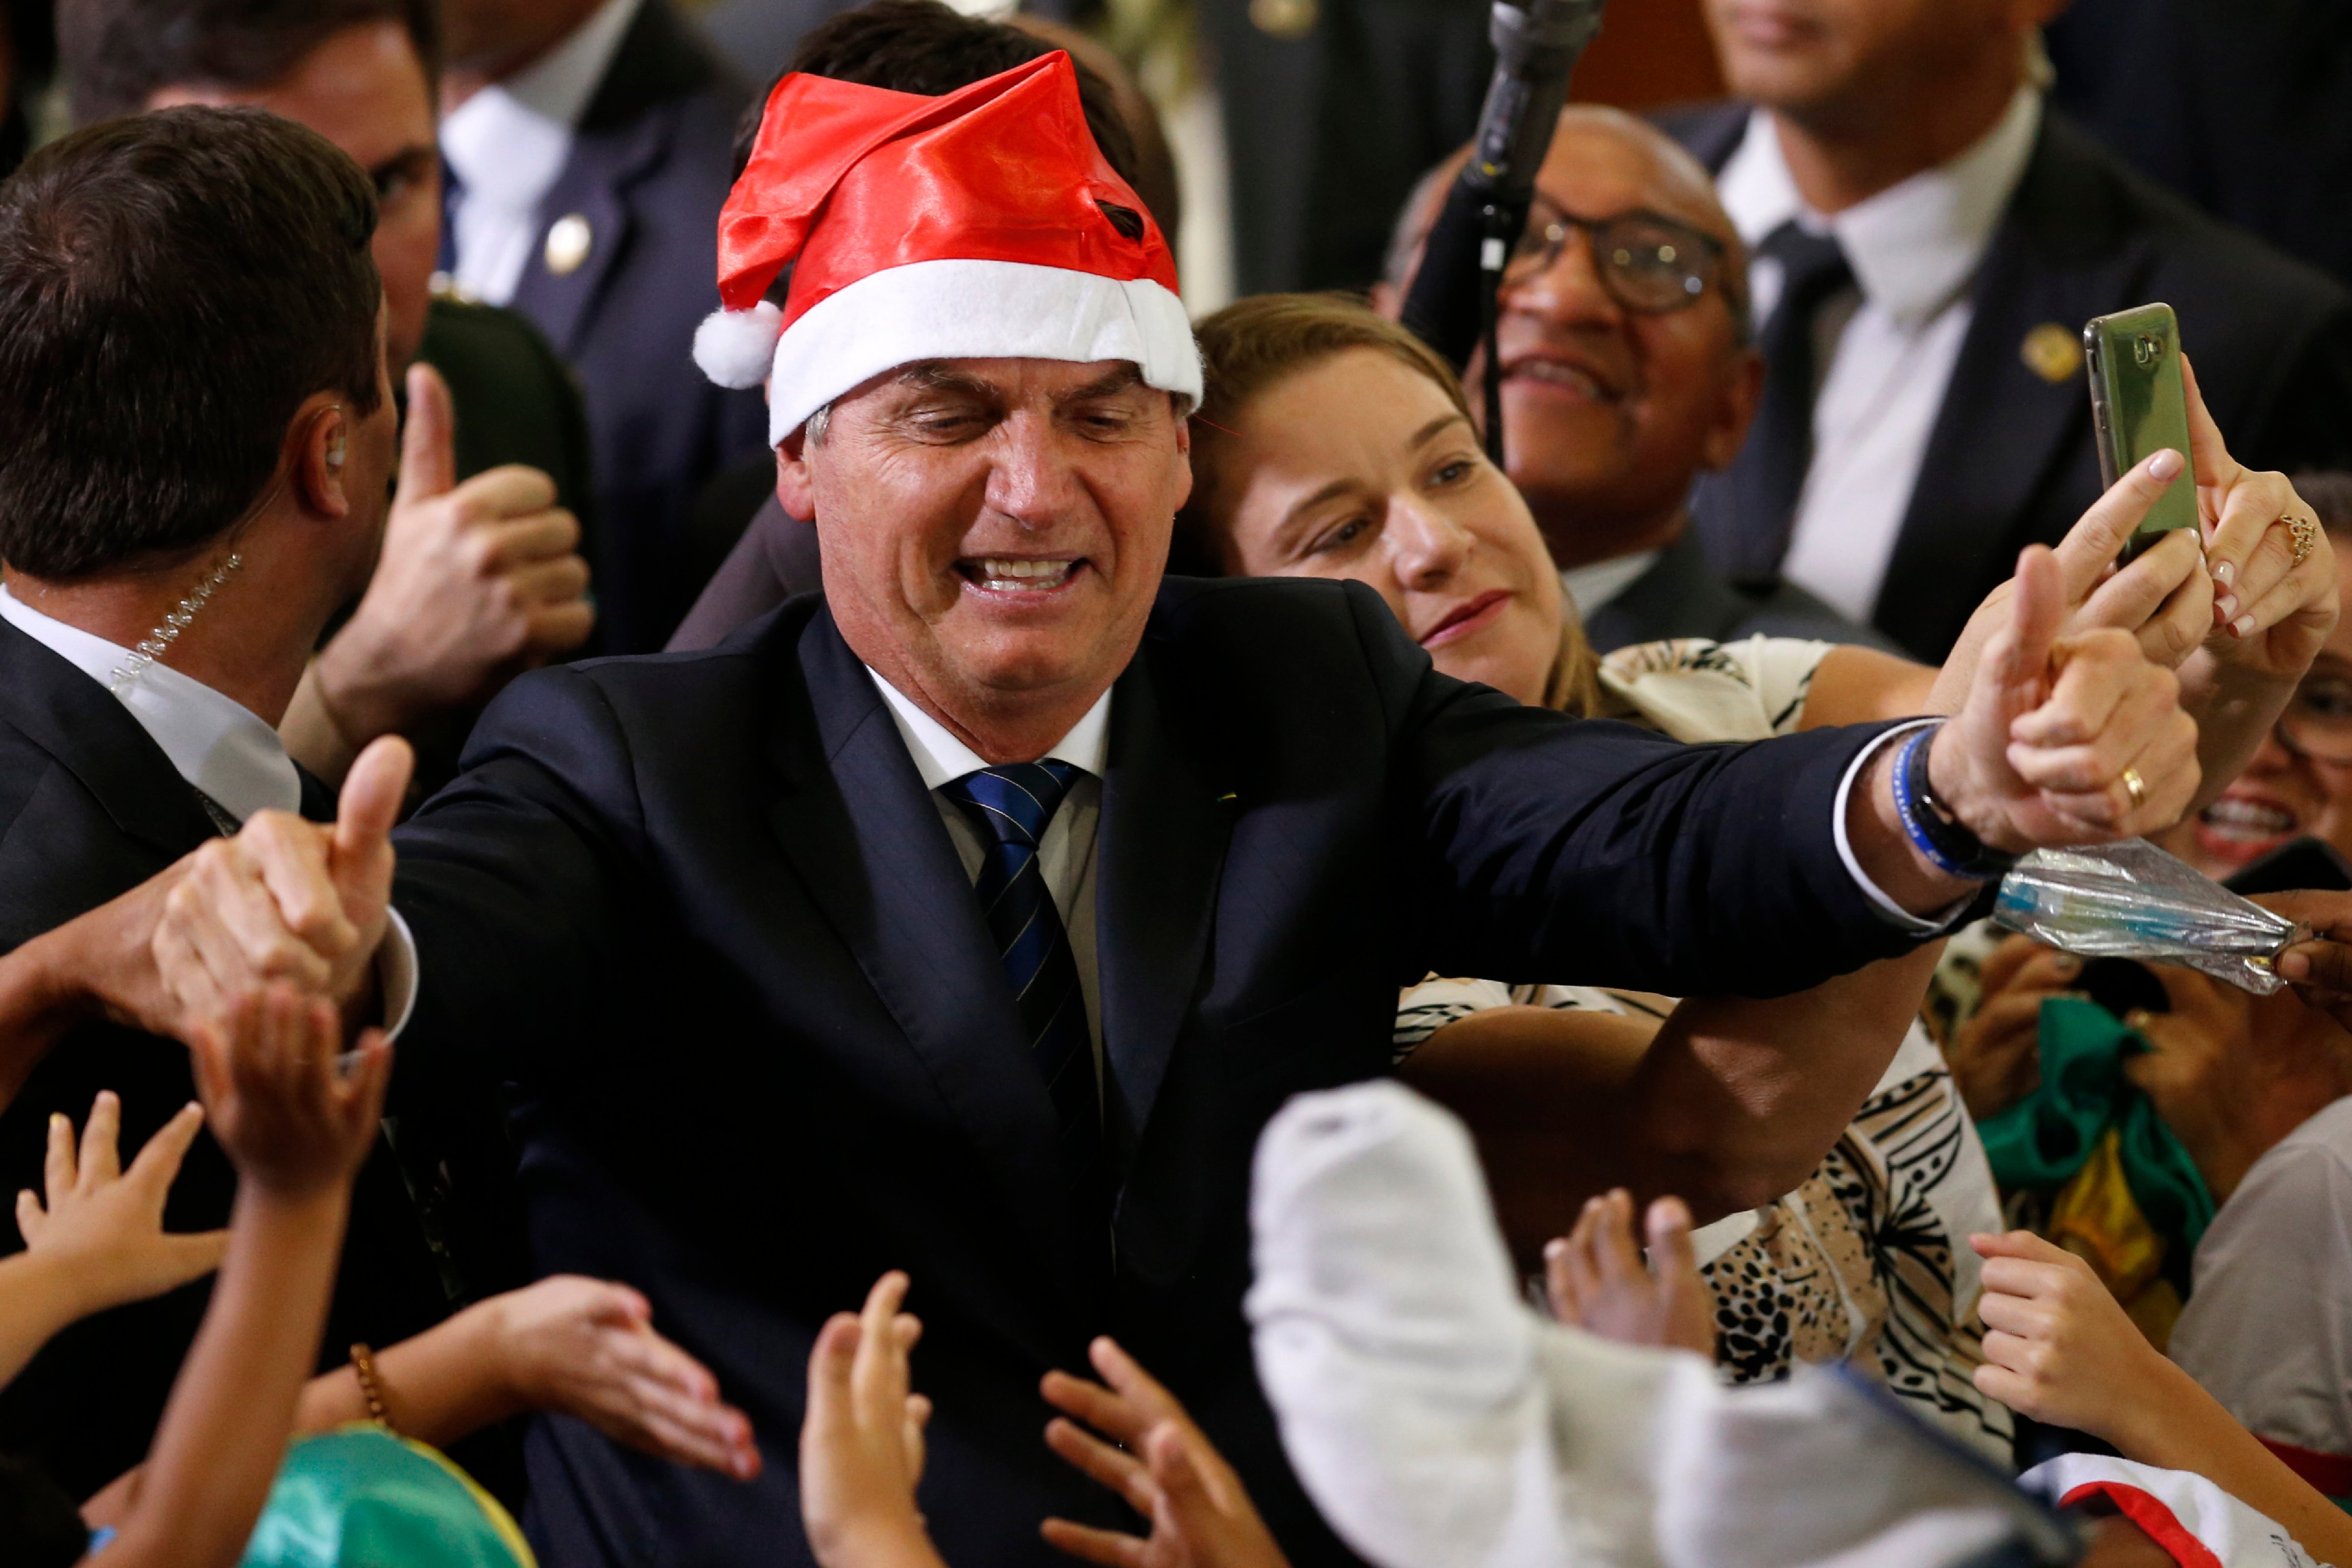 Brazil's President Jair Bolsonaro wears a Santa hat during the Christmas celebration with staff and students at the Planalto Presidential Palace, in Brasilia, Brazil, Thursday, Dec. 19, 2019. He told Brazilian TV that he temporarily lost his memory after a fall Monday night. (Eraldo Peres / AP)